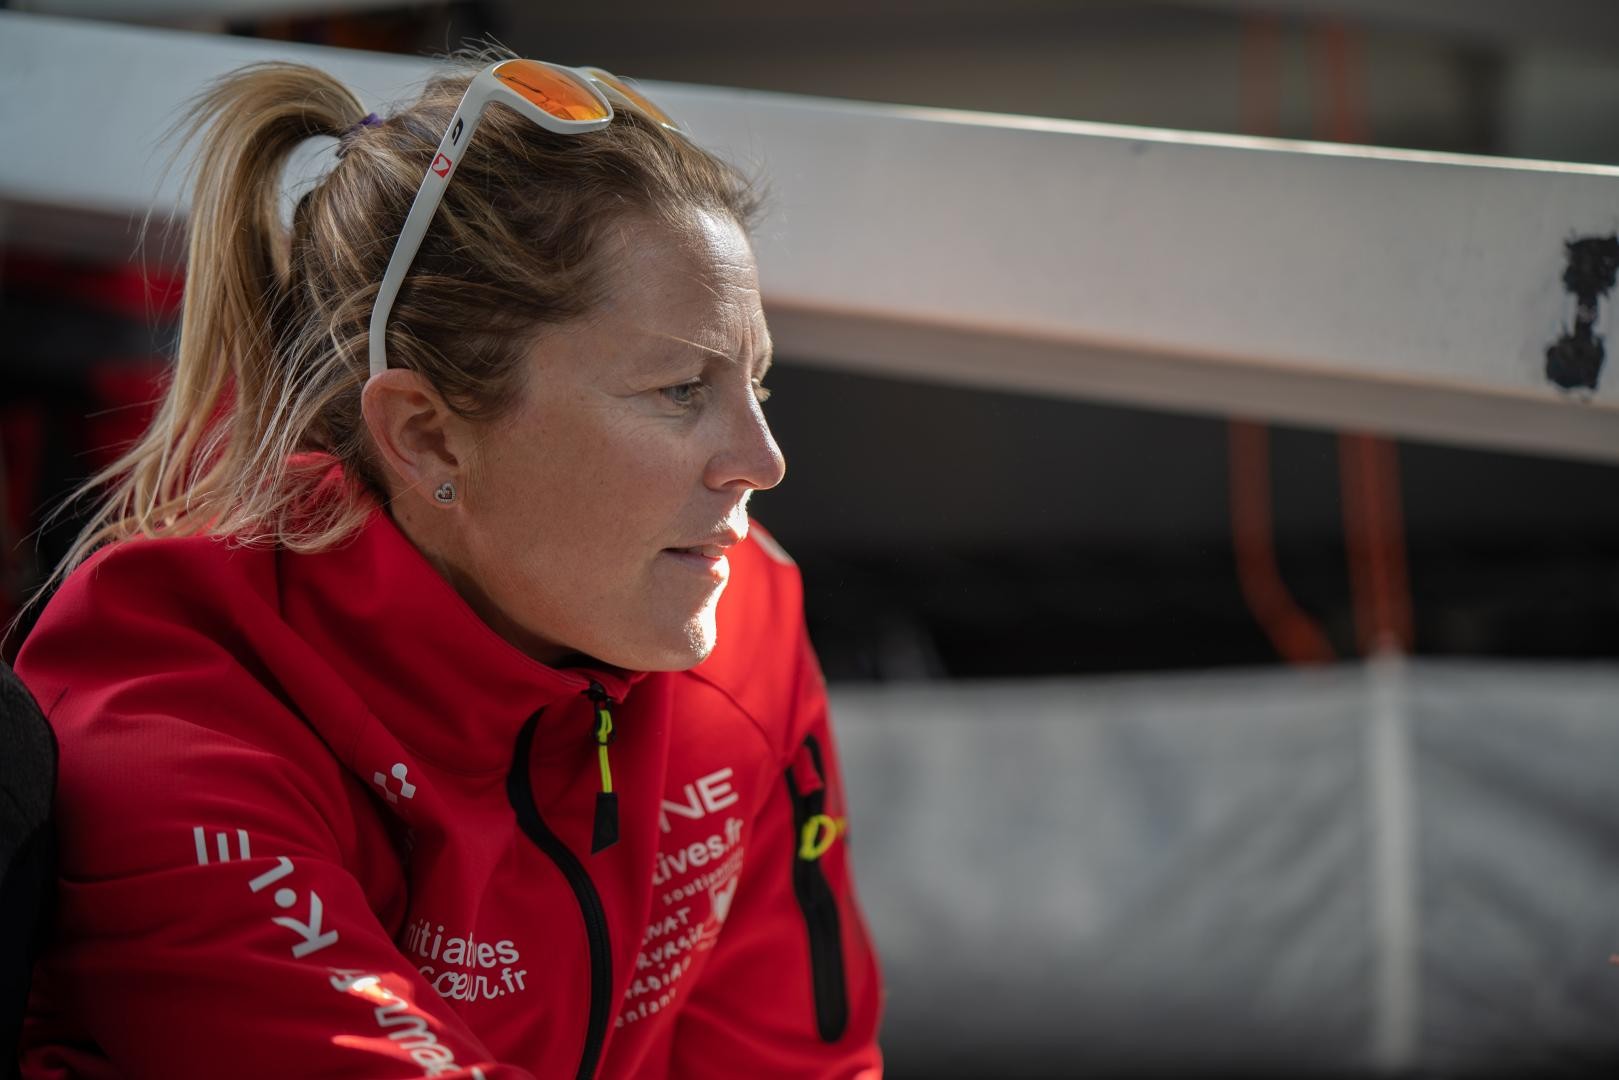 Sam Davies on Initiatives-Coeur (IMOCA) abandons the race: 'I can see my boat bending under my feet'